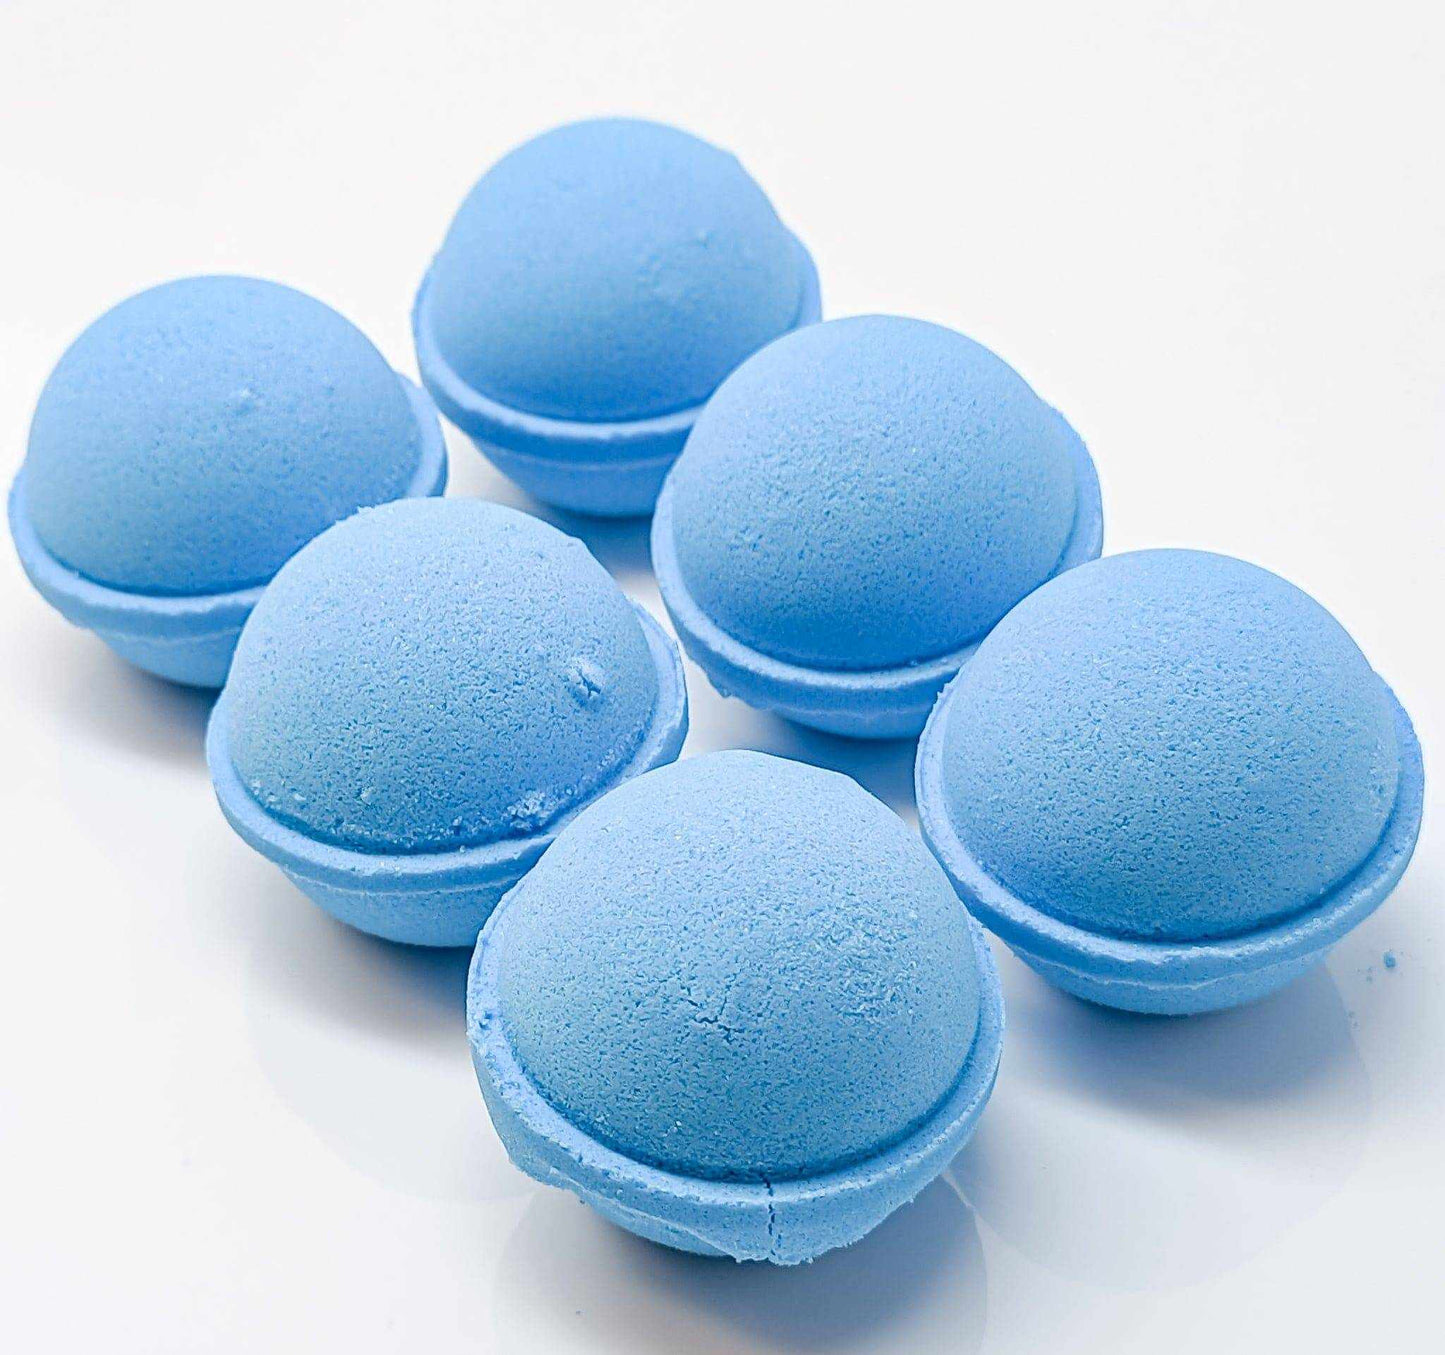 Bay Rum bath bomb by CG Pure Wash, offering a natural and indulgent bath experience | CG Pure Wash.